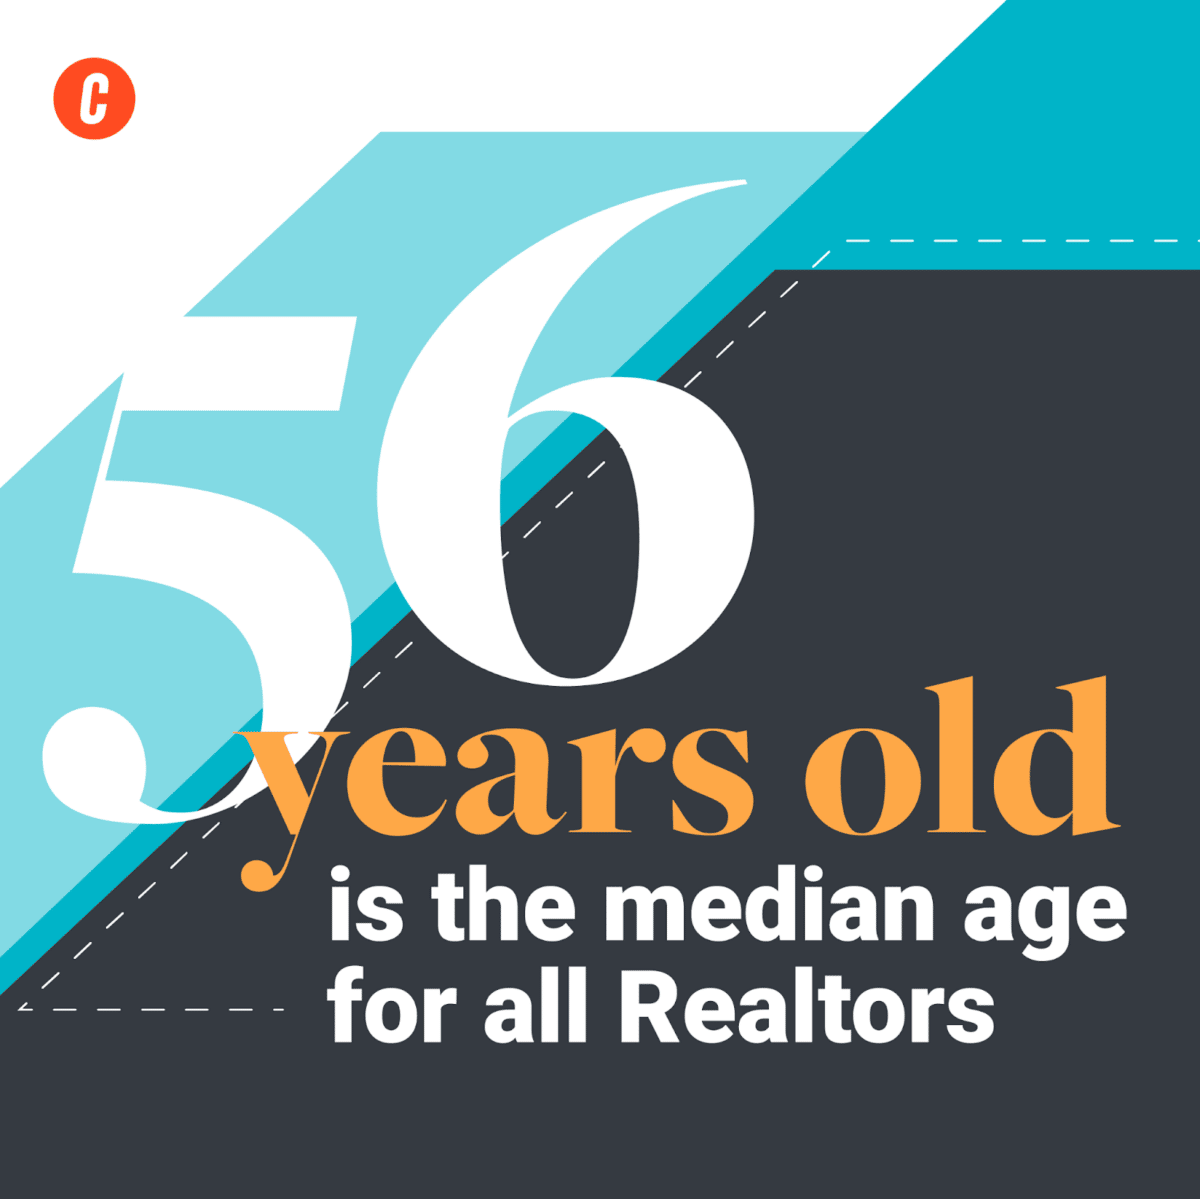 56 yeads old media age for all realtors